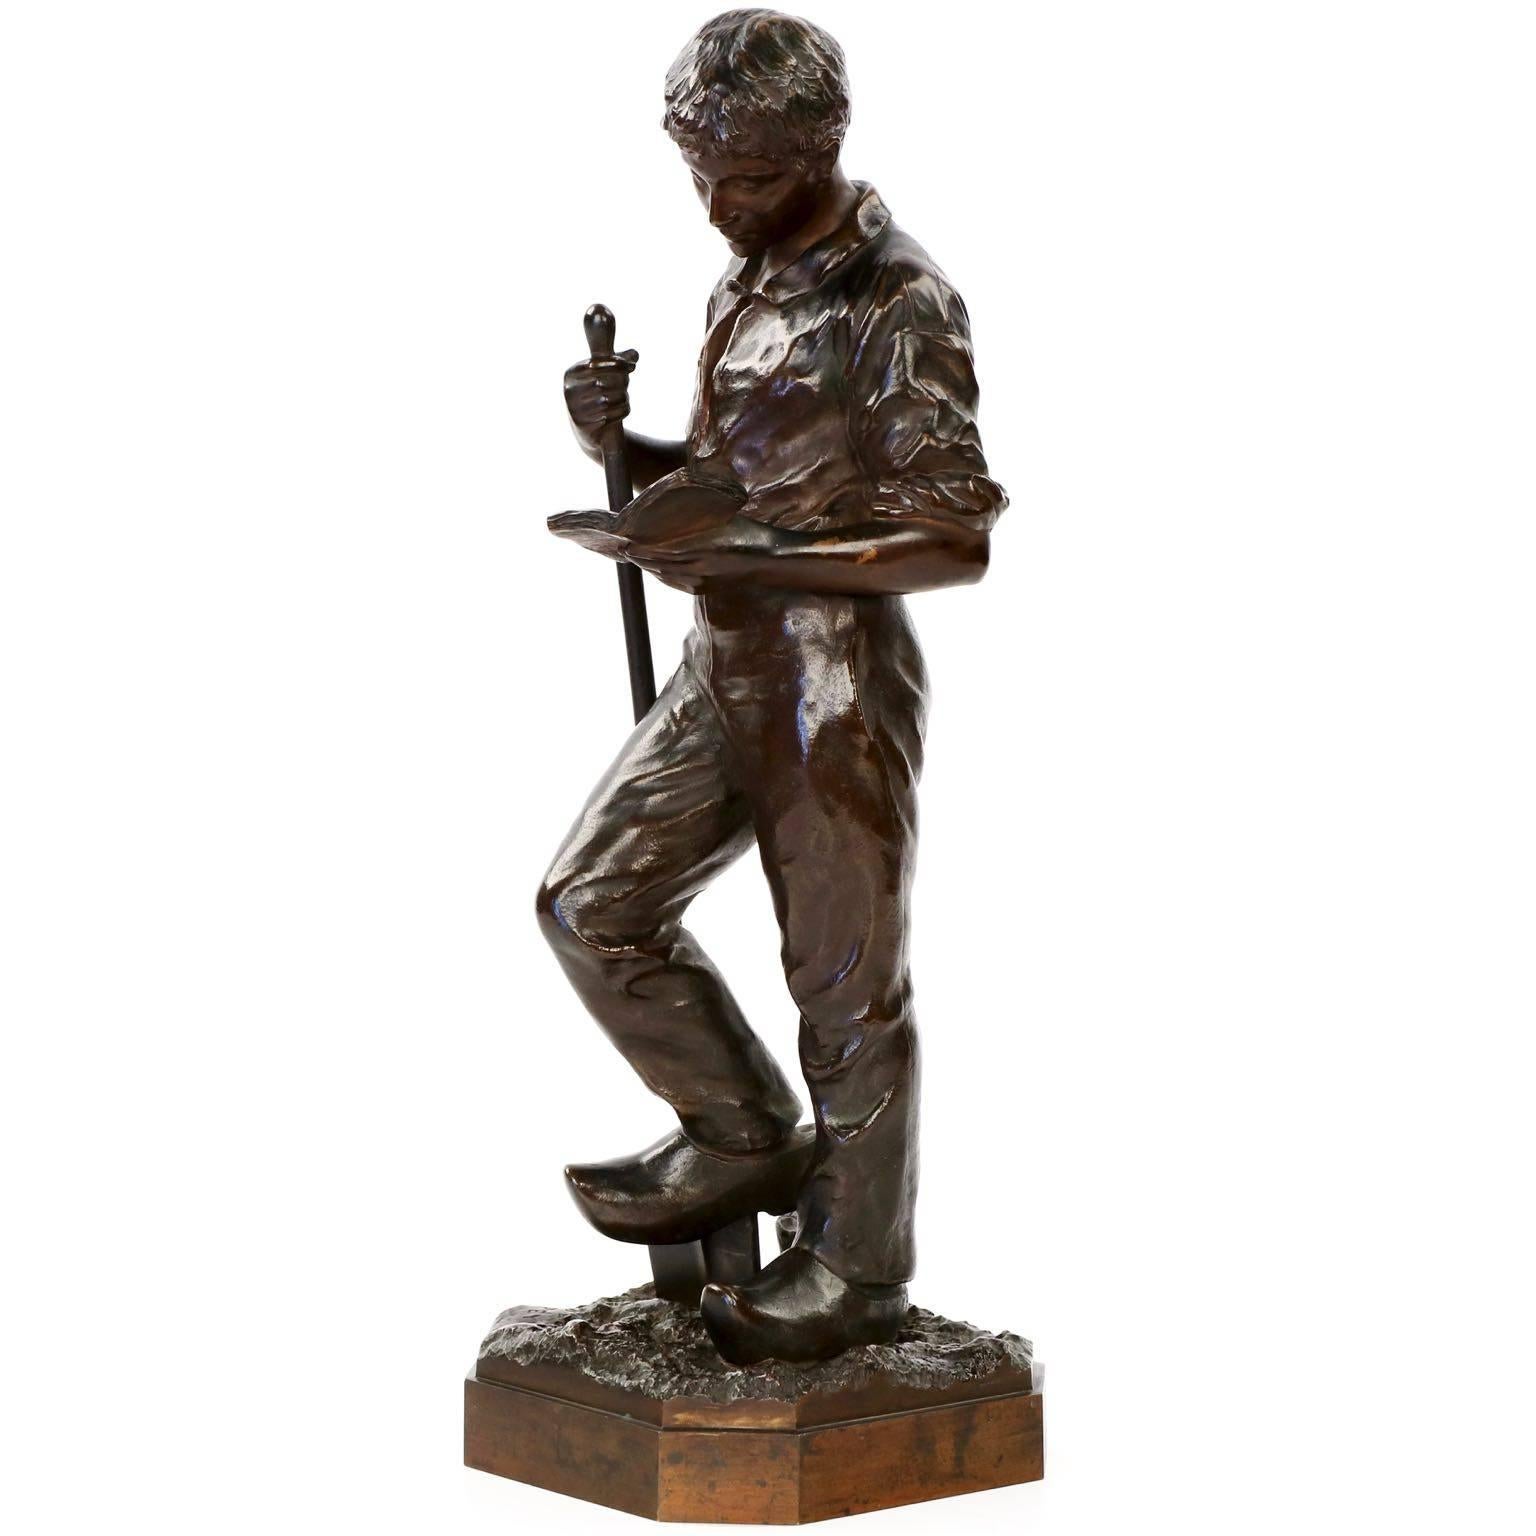 French Bronze Sculpture of Laborer Studying by Hippolyte Peyrol